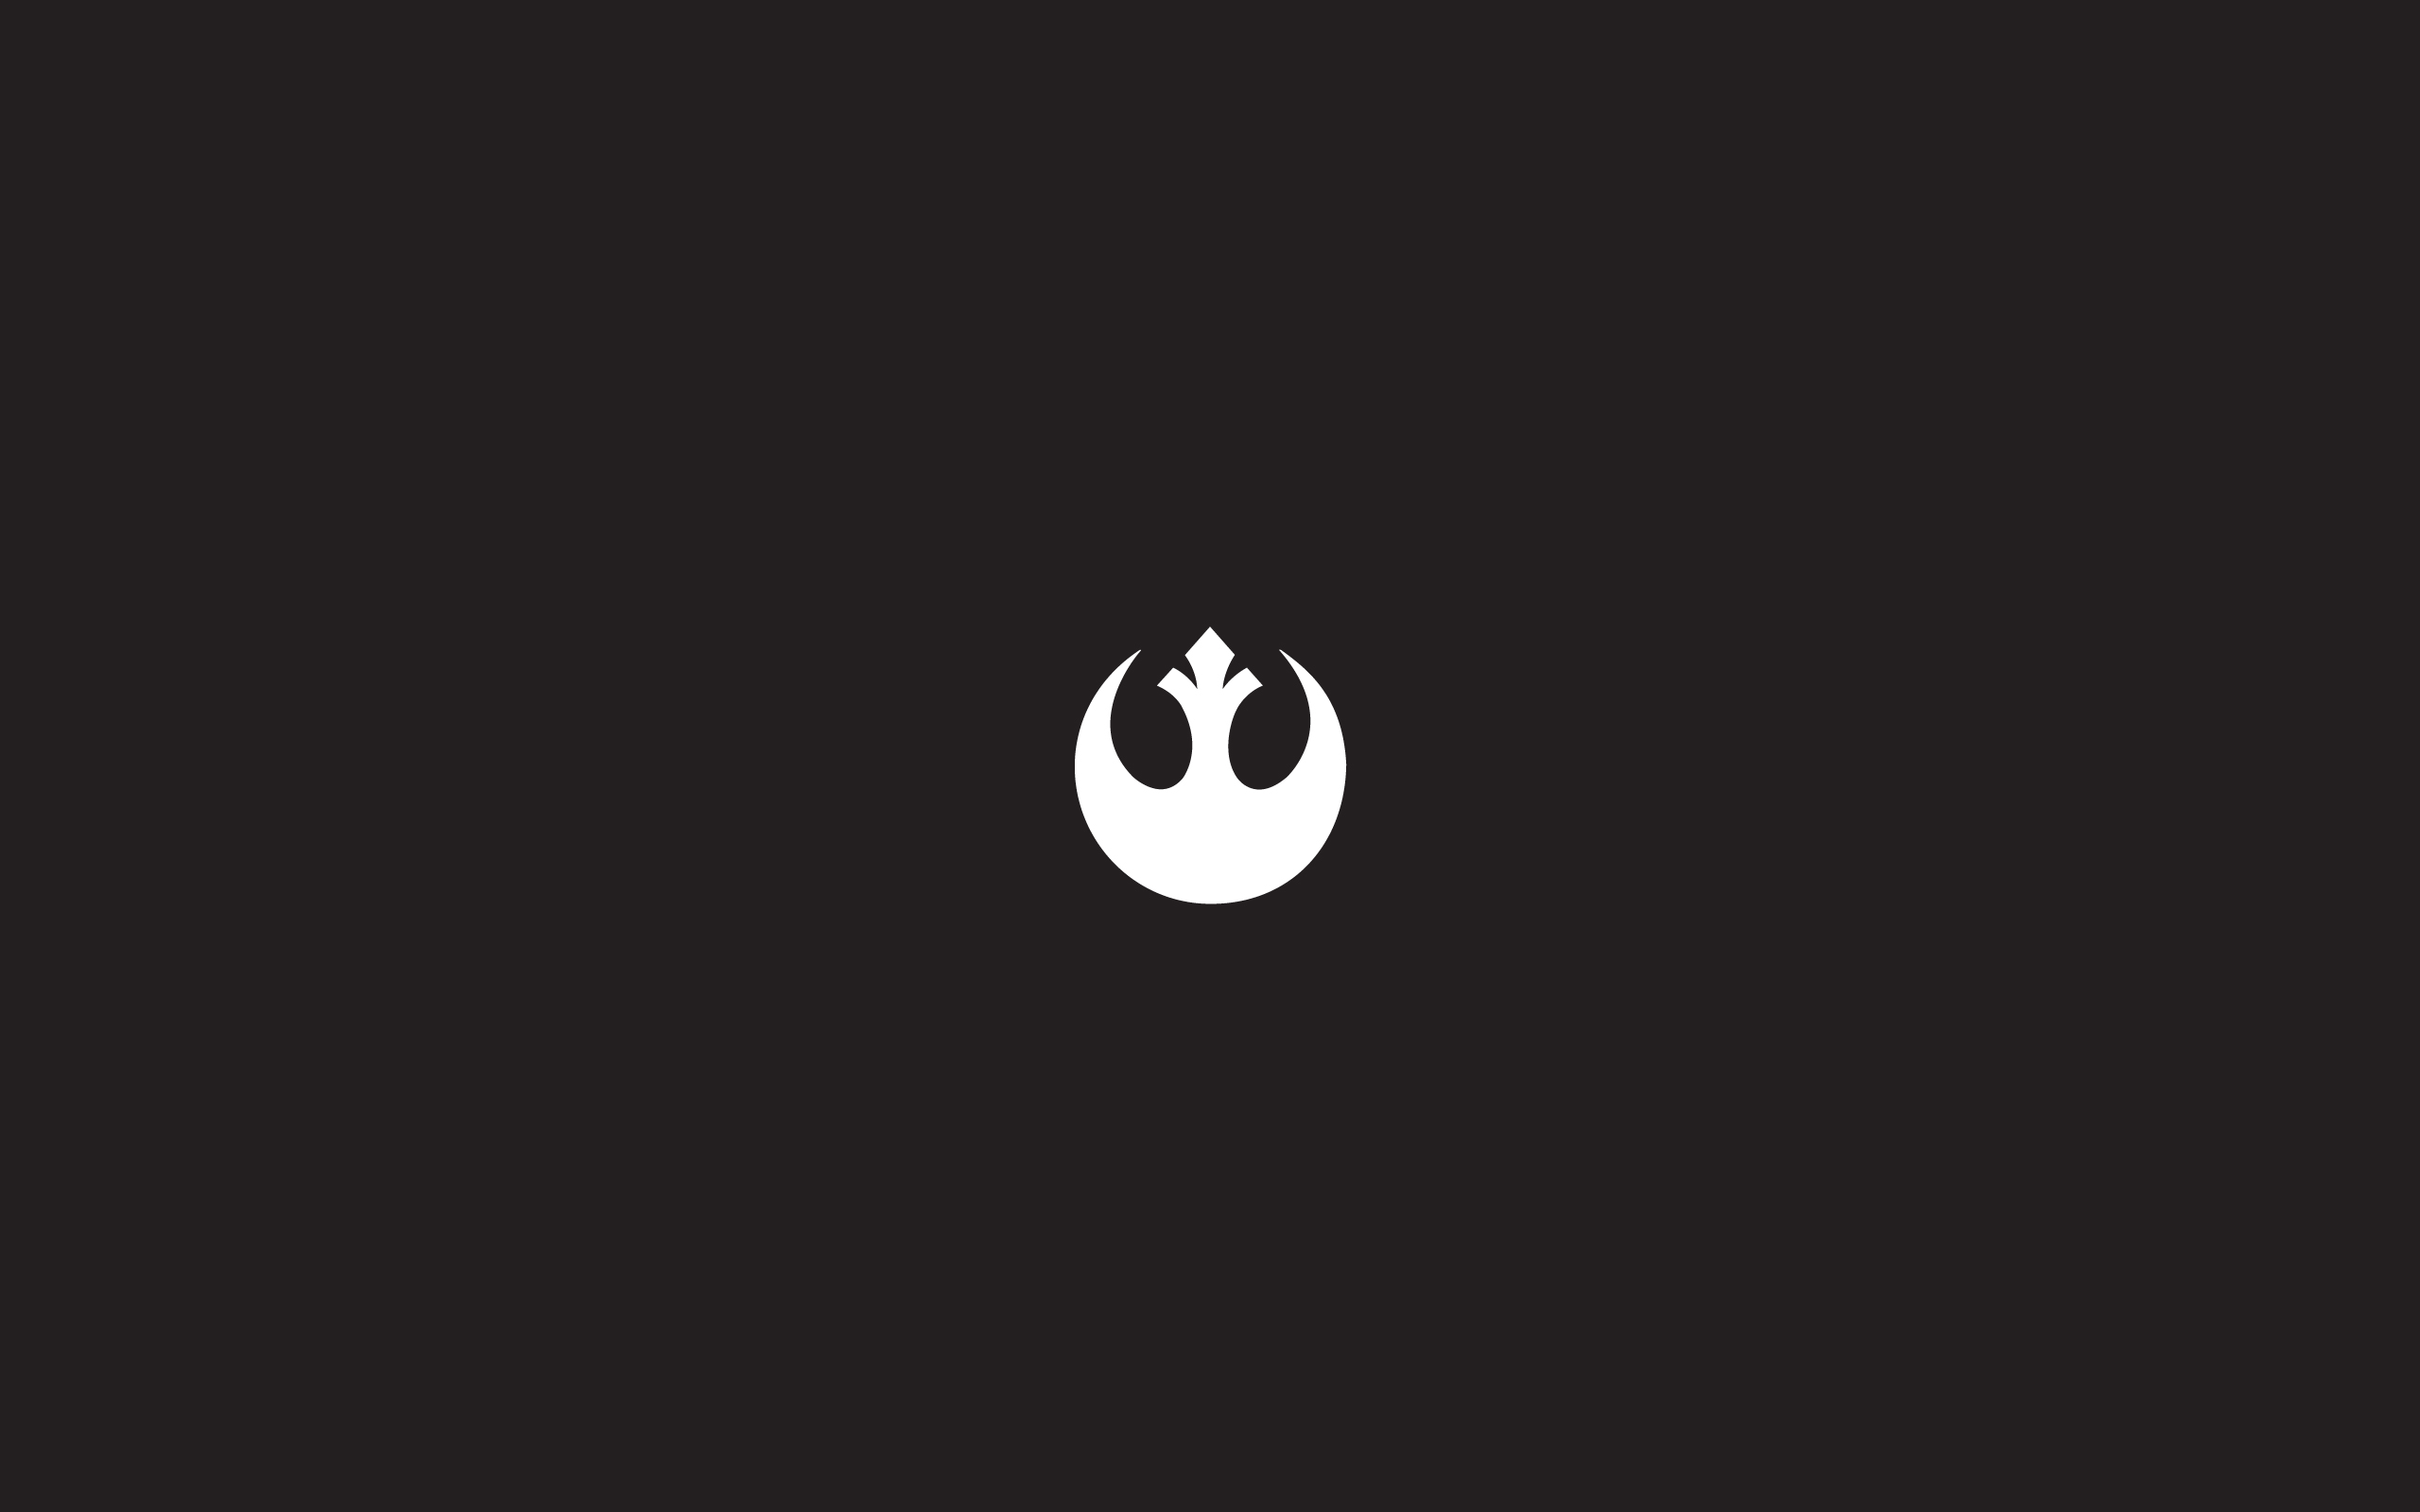 A black and white Rebel Alliance symbol from Star Wars - Star Wars